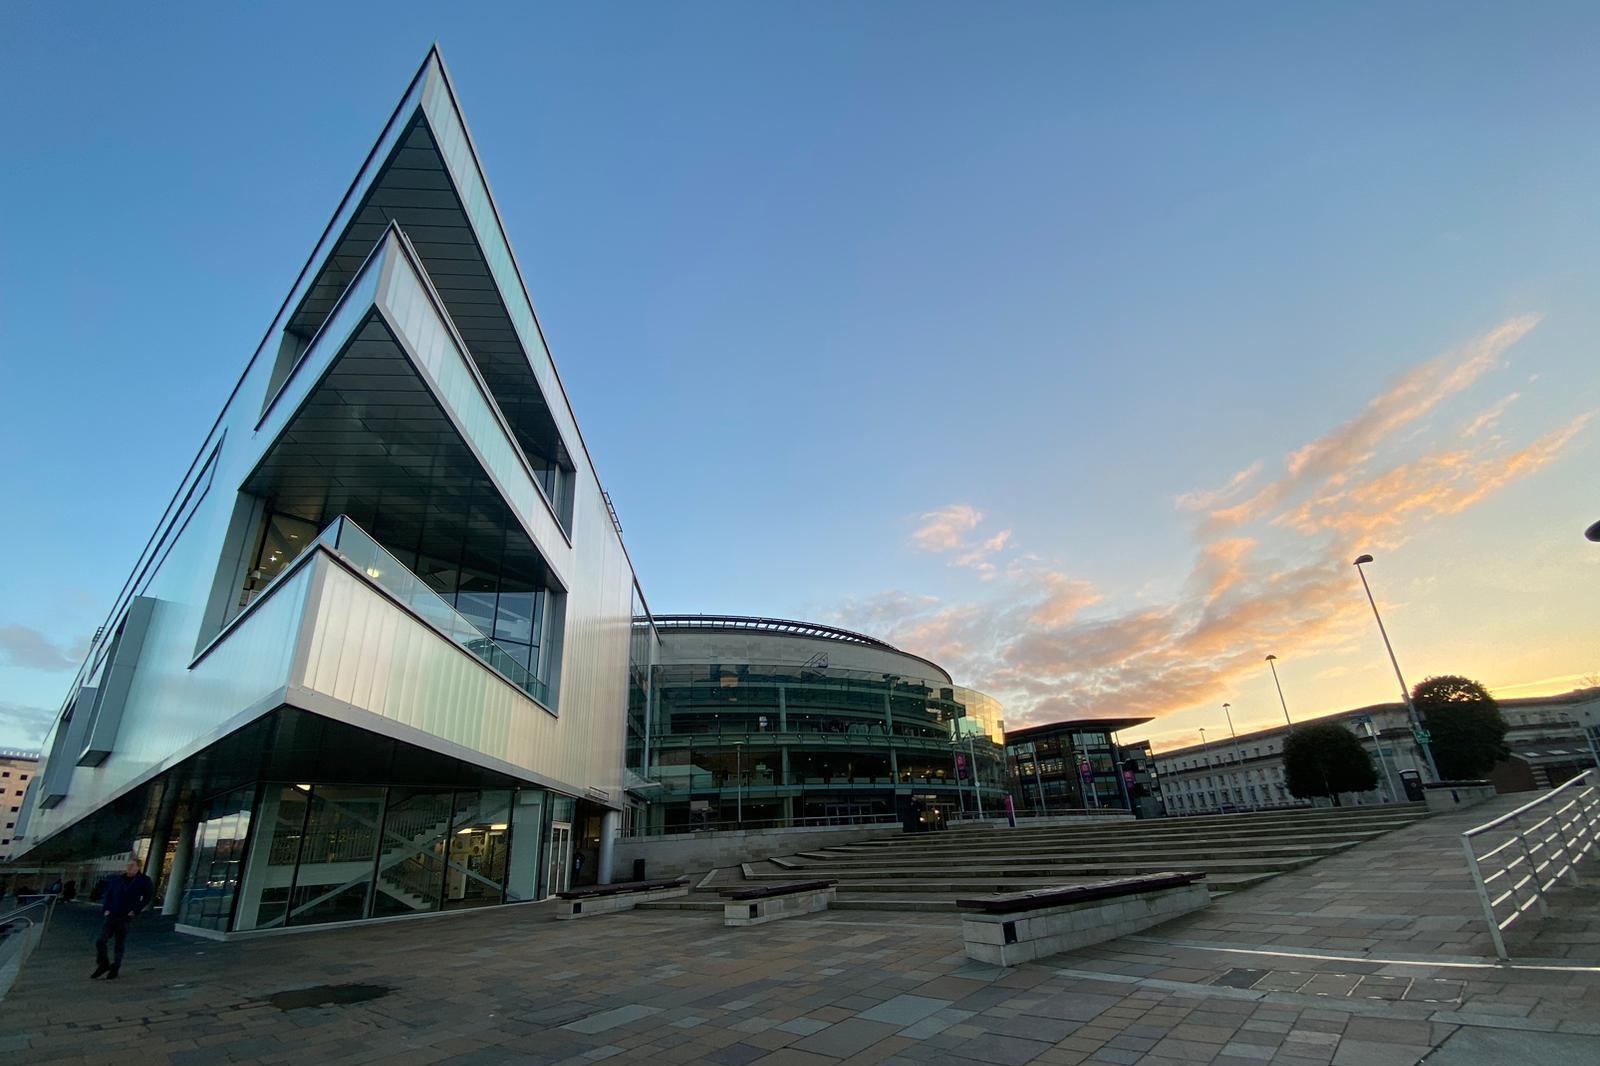 Sunset at the ICC Belfast